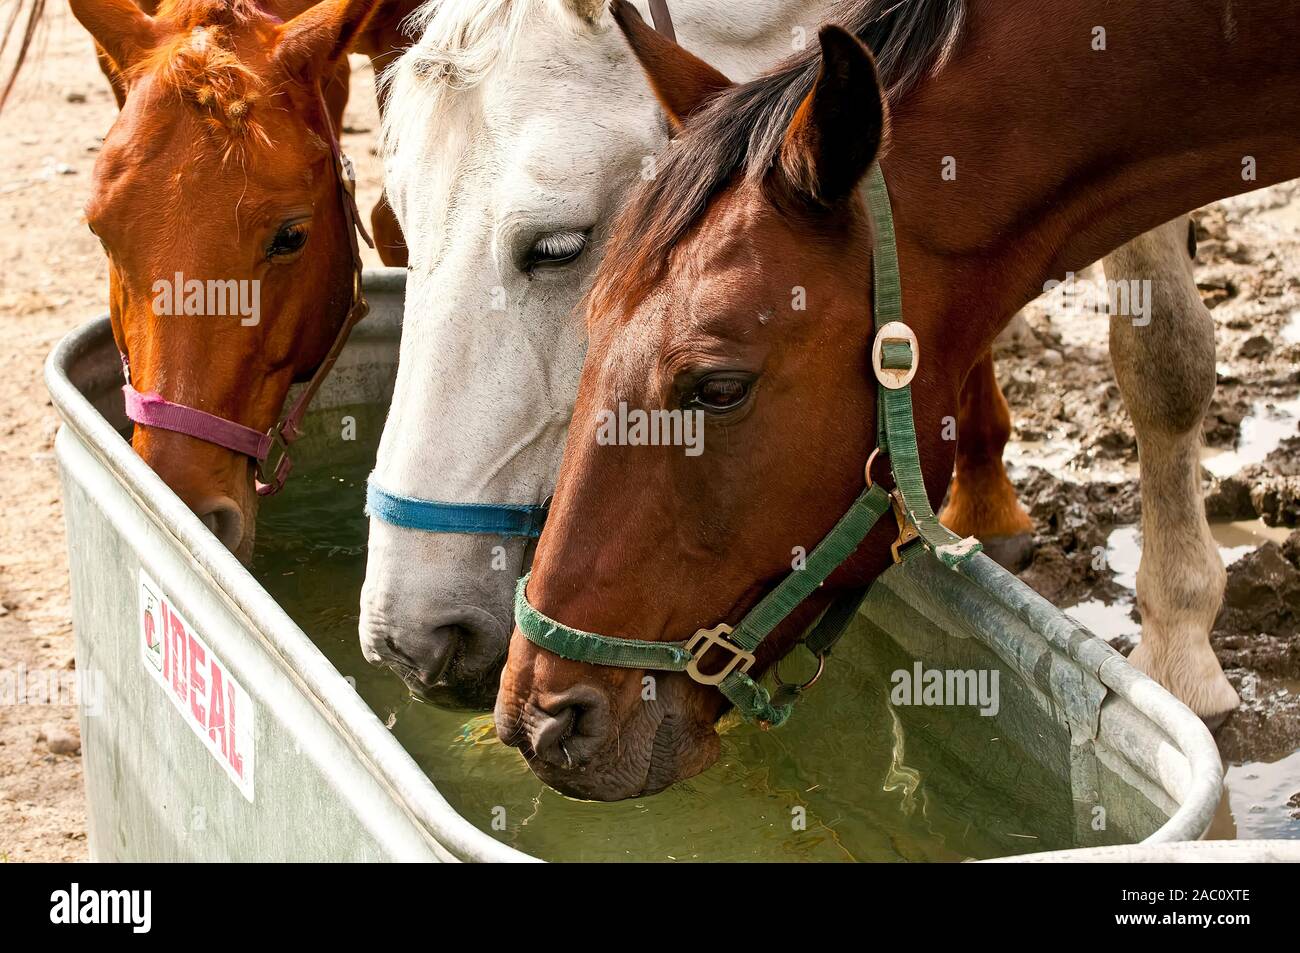 Three horses drinking from a water trough. Stock Photo